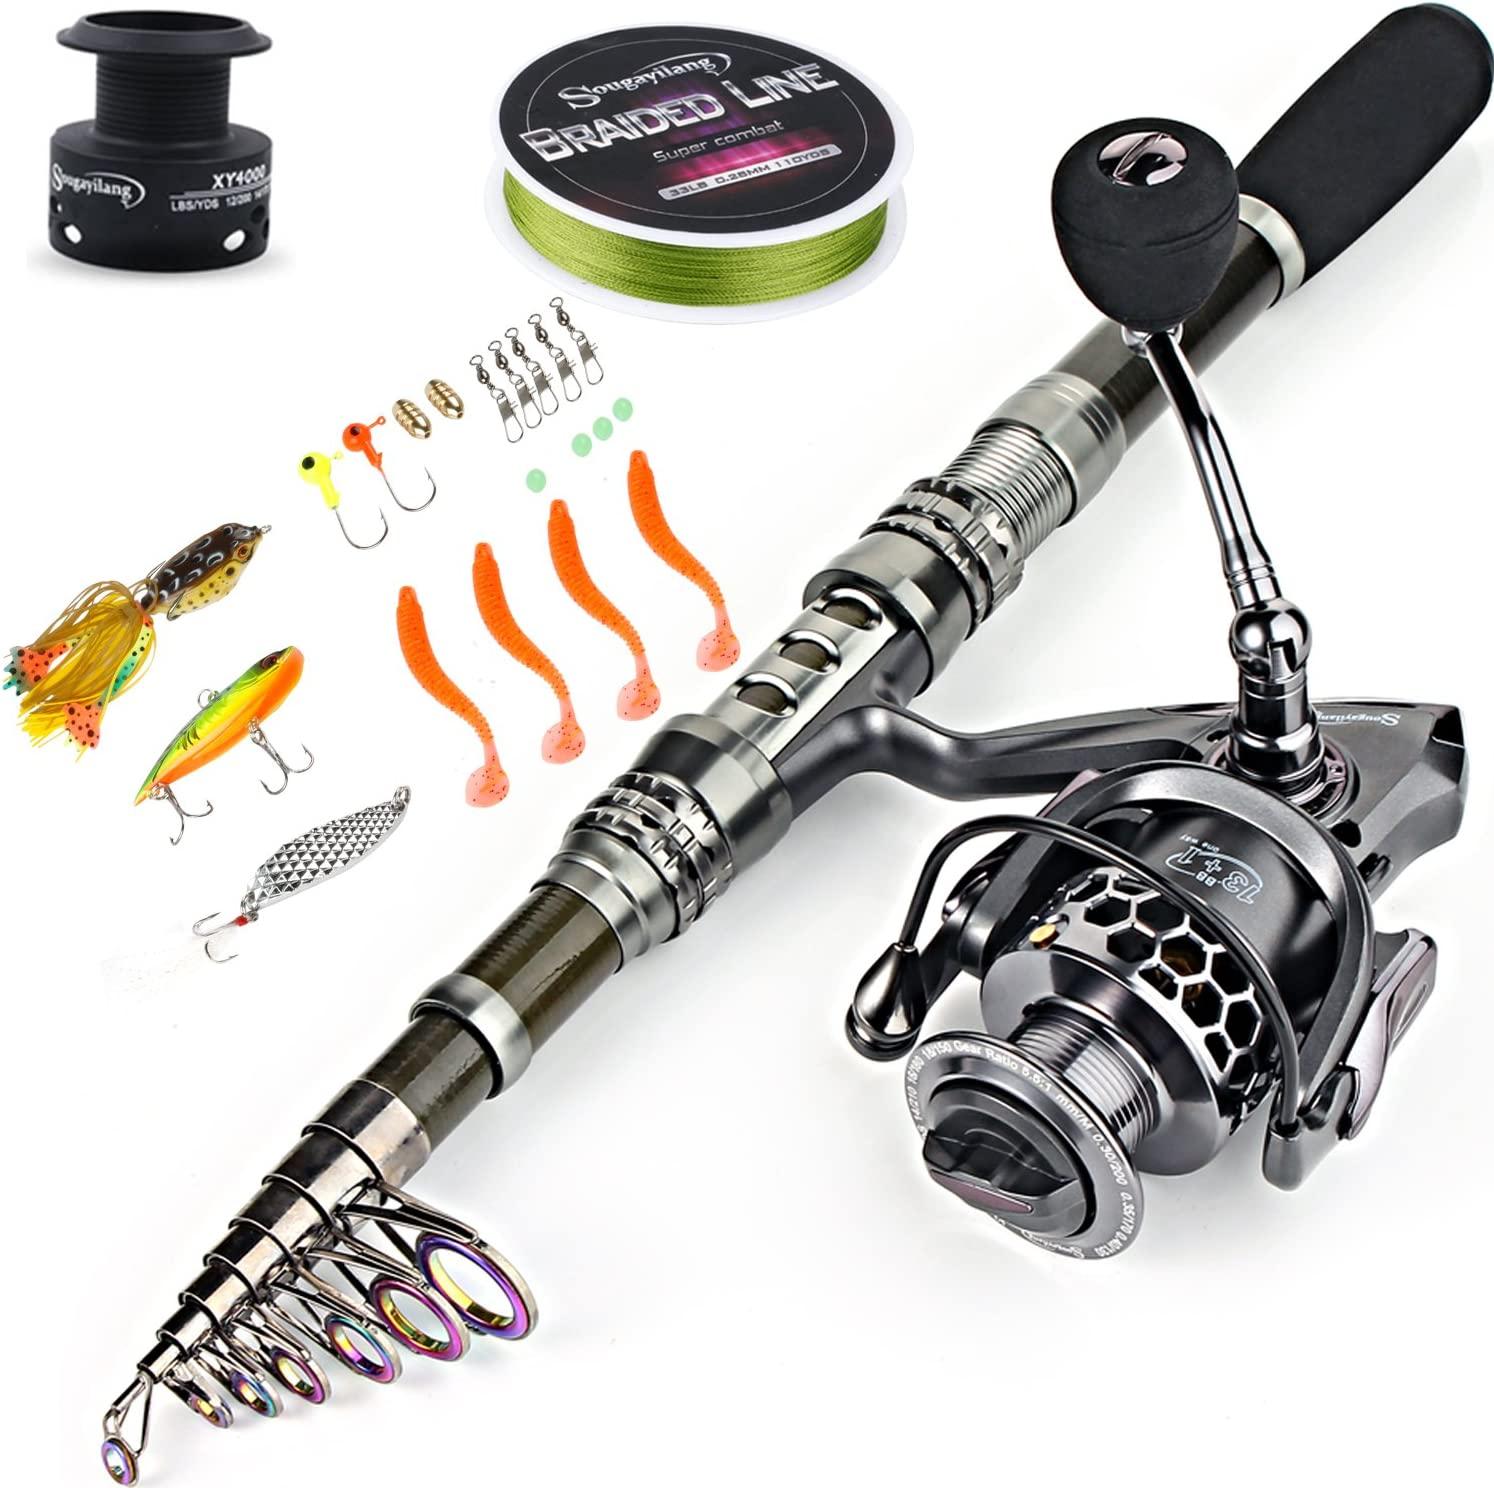 Sougayilang Fishing Rod Combos with Telescopic Fishing Pole Spinning Reels  Fishing Carrier Bag for Travel Saltwater Freshwater Fishing 1.8M/5.91FT A- fishing Full Kits With Carrier Case